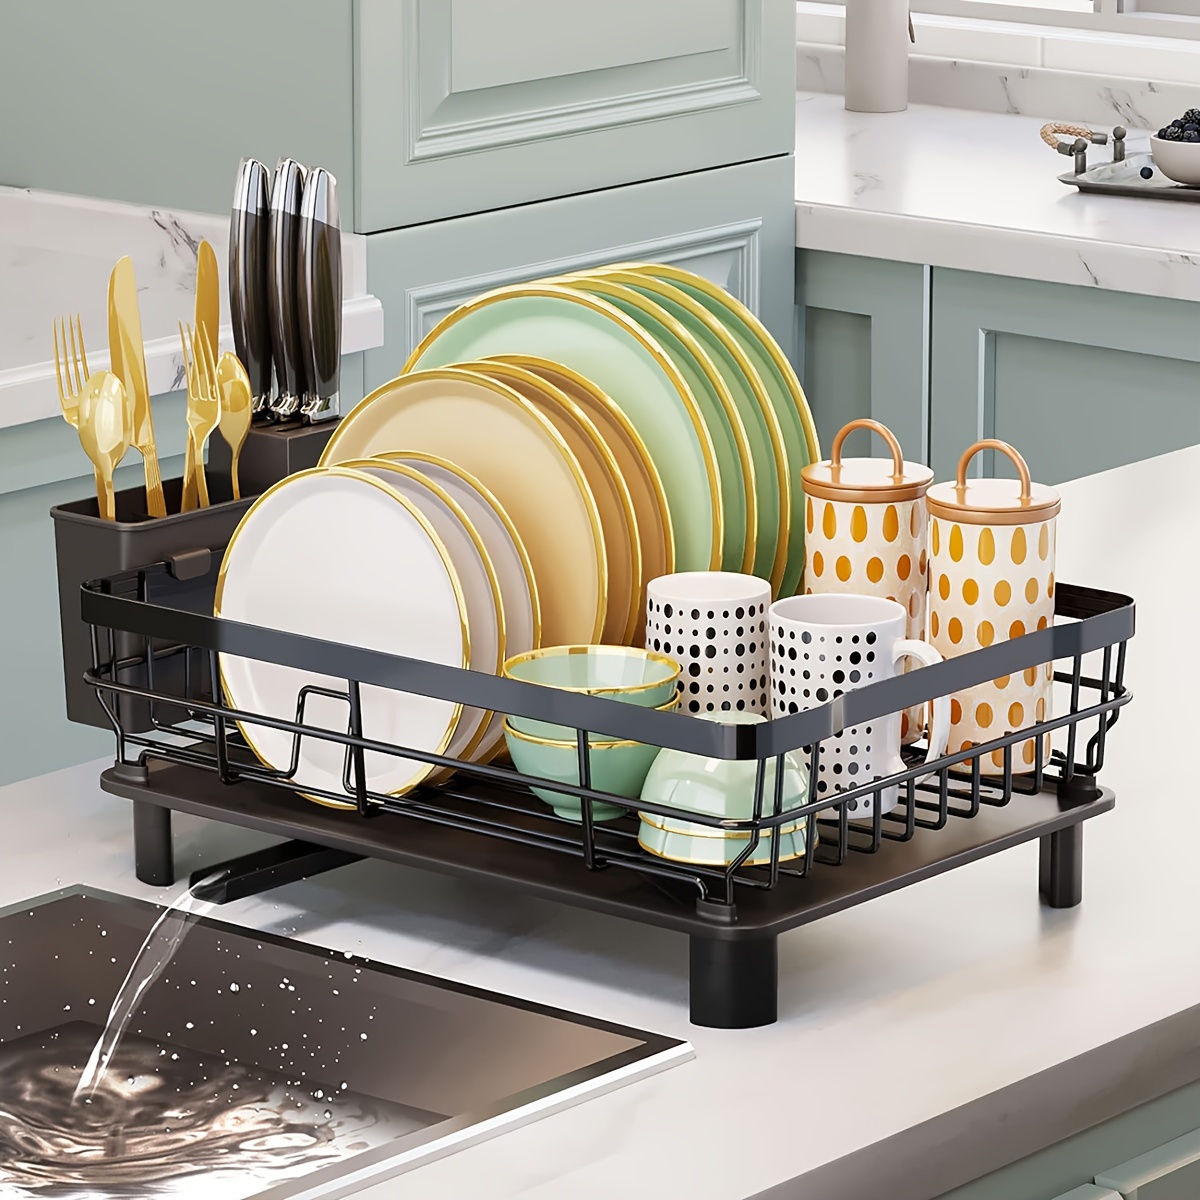 

Dish Rack - Durable Dish Drying For Kitchen Counter, Dish Drainers With Drainboard, Kitchen Organization And Storage For New Apartment